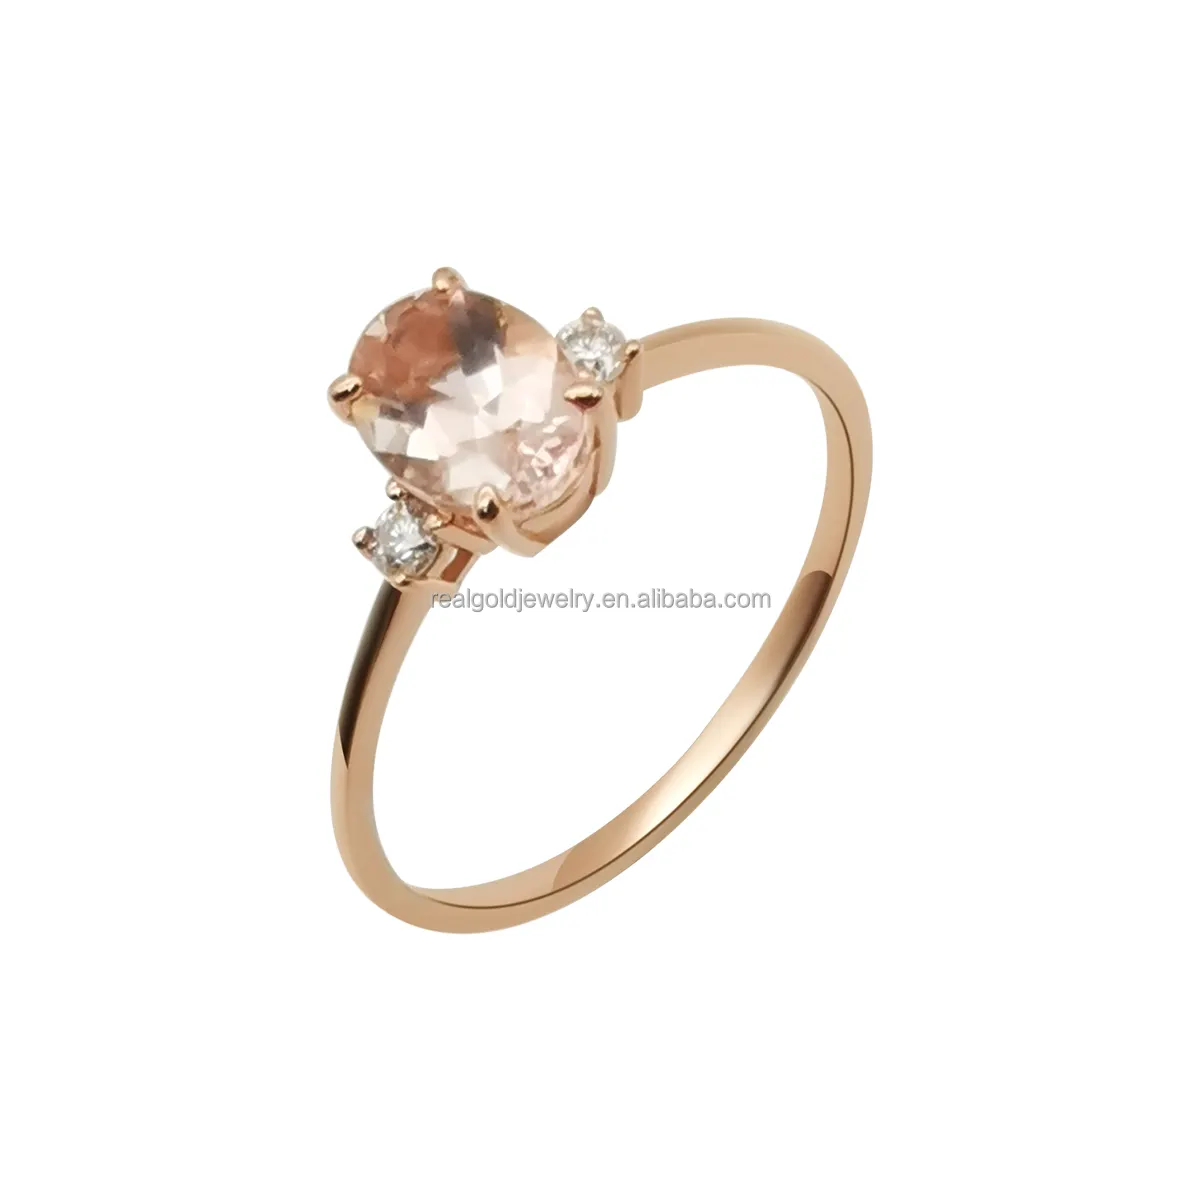 Morganite Unique Design Wedding Rings Jewelry Gold Fashion 14K Solid for Women Trendy Yellow Gold Engagement Ring Geometric